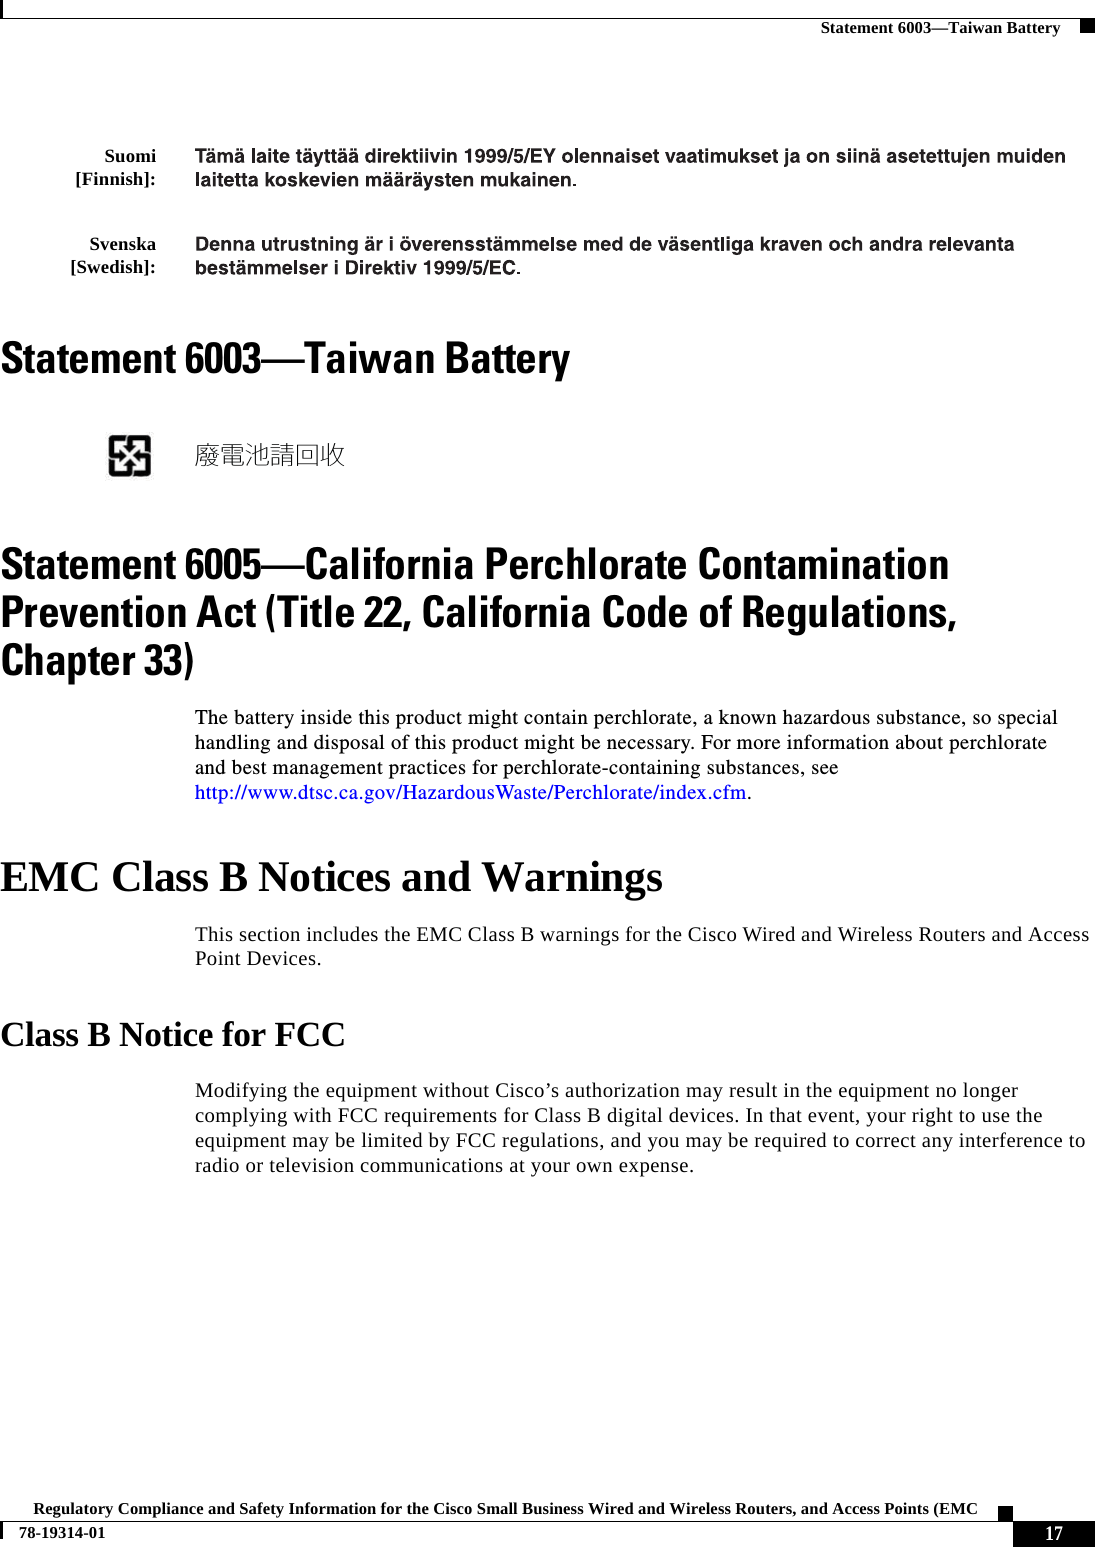  17Regulatory Compliance and Safety Information for the Cisco Small Business Wired and Wireless Routers, and Access Points (EMC 78-19314-01Statement 6003—Taiwan BatteryStatement 6003—Taiwan BatteryStatement 6005—California Perchlorate Contamination Prevention Act (Title 22, California Code of Regulations, Chapter 33)The battery inside this product might contain perchlorate, a known hazardous substance, so special handling and disposal of this product might be necessary. For more information about perchlorate and best management practices for perchlorate-containing substances, see http://www.dtsc.ca.gov/HazardousWaste/Perchlorate/index.cfm.EMC Class B Notices and WarningsThis section includes the EMC Class B warnings for the Cisco Wired and Wireless Routers and Access Point Devices.Class B Notice for FCCModifying the equipment without Cisco’s authorization may result in the equipment no longer complying with FCC requirements for Class B digital devices. In that event, your right to use the equipment may be limited by FCC regulations, and you may be required to correct any interference to radio or television communications at your own expense.Suomi [Finnish]: Svenska [Swedish]: 廢電池請回收